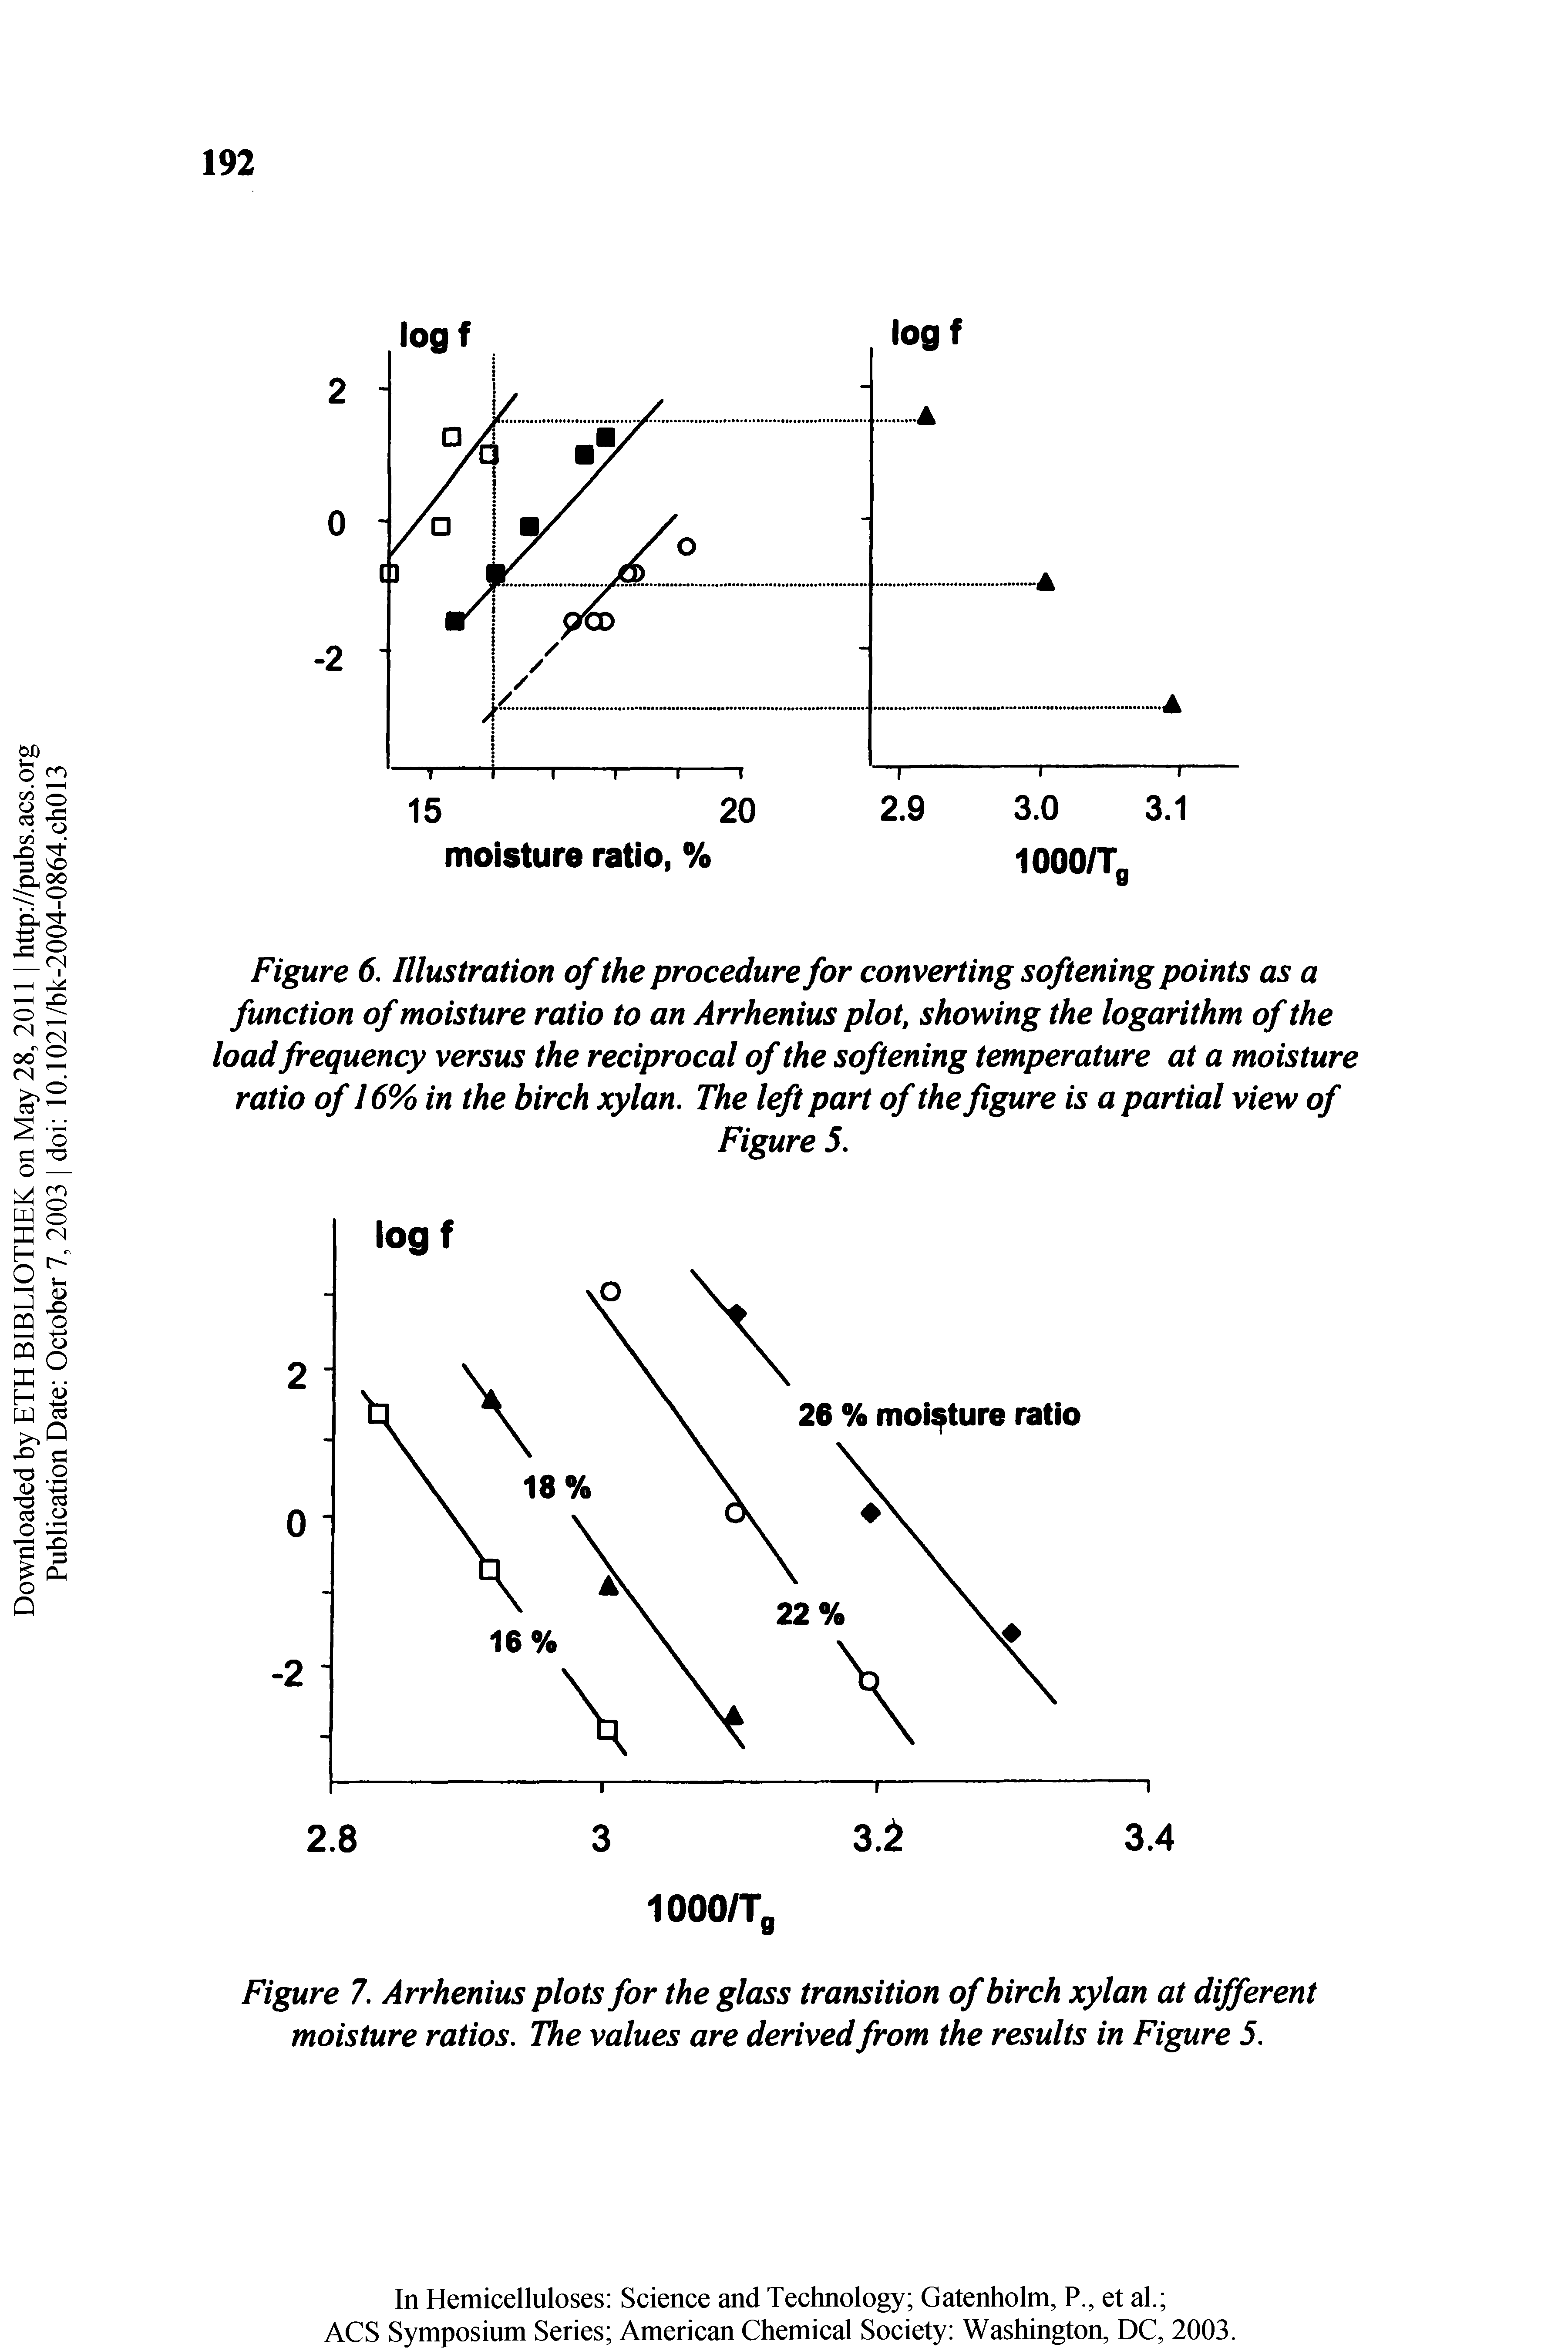 Figure 7. Arrhenius plots for the glass transition of birch xylan at different moisture ratios. The values are derived from the results in Figure 5.